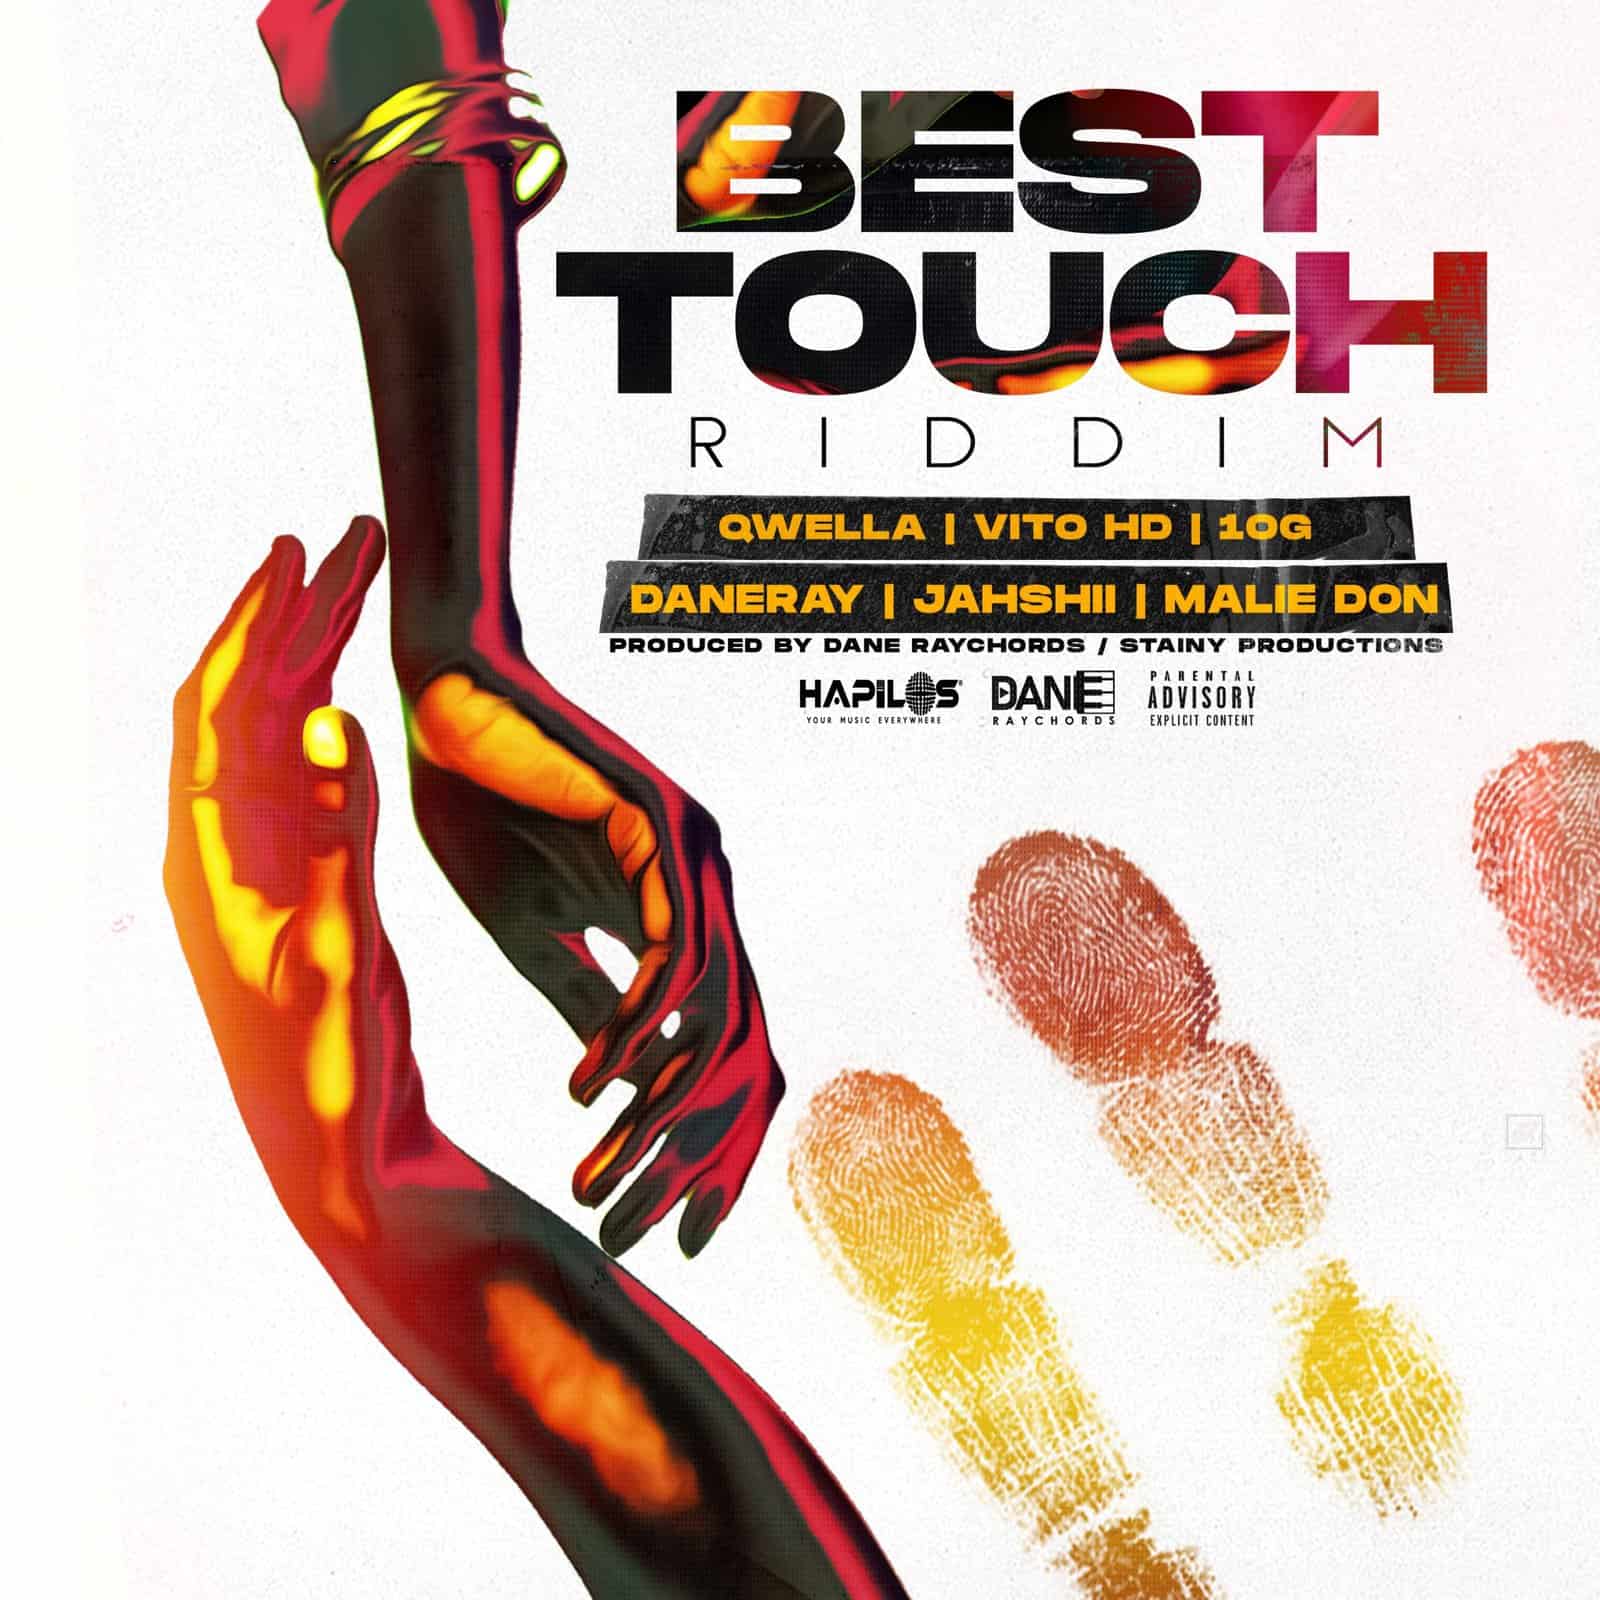 Best Touch Riddim - Dane Raychords / Stainy Productions